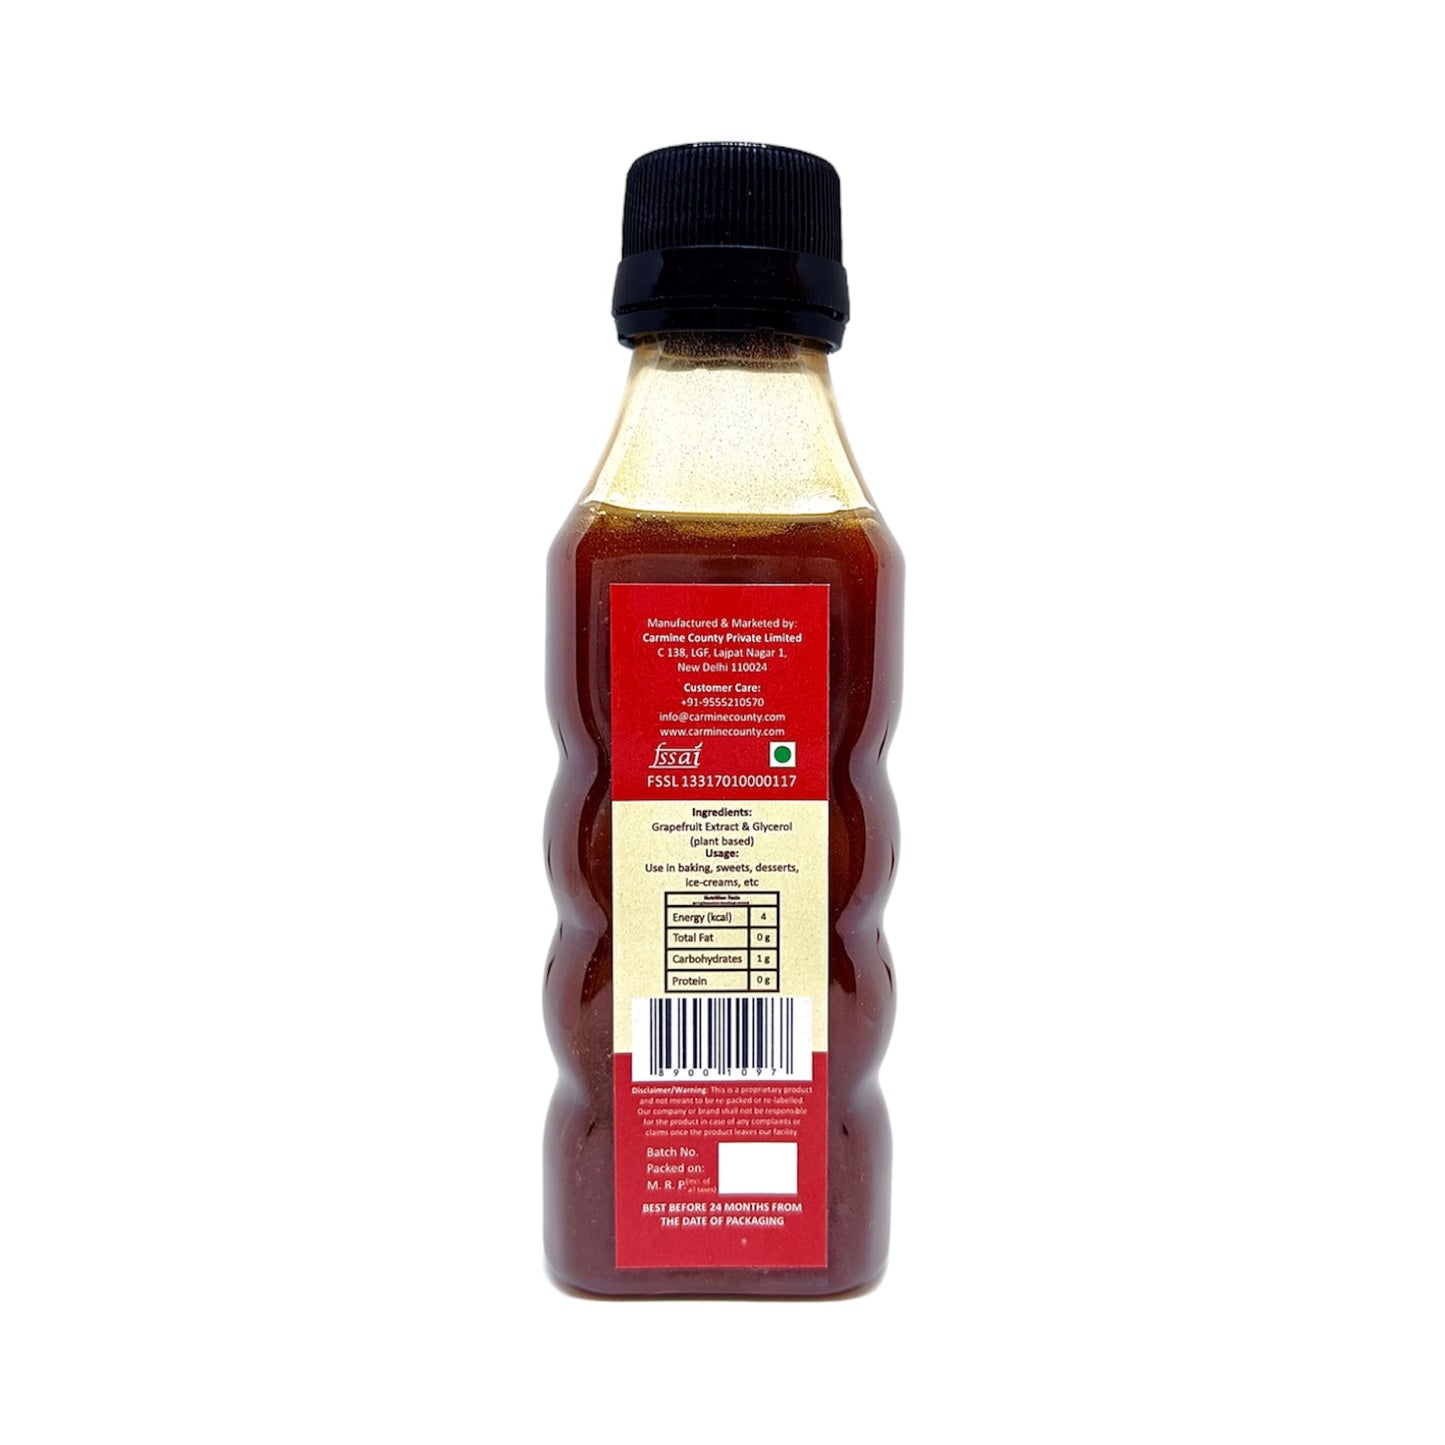 Carmine County All Natural Grapefruit Extract 100 ml